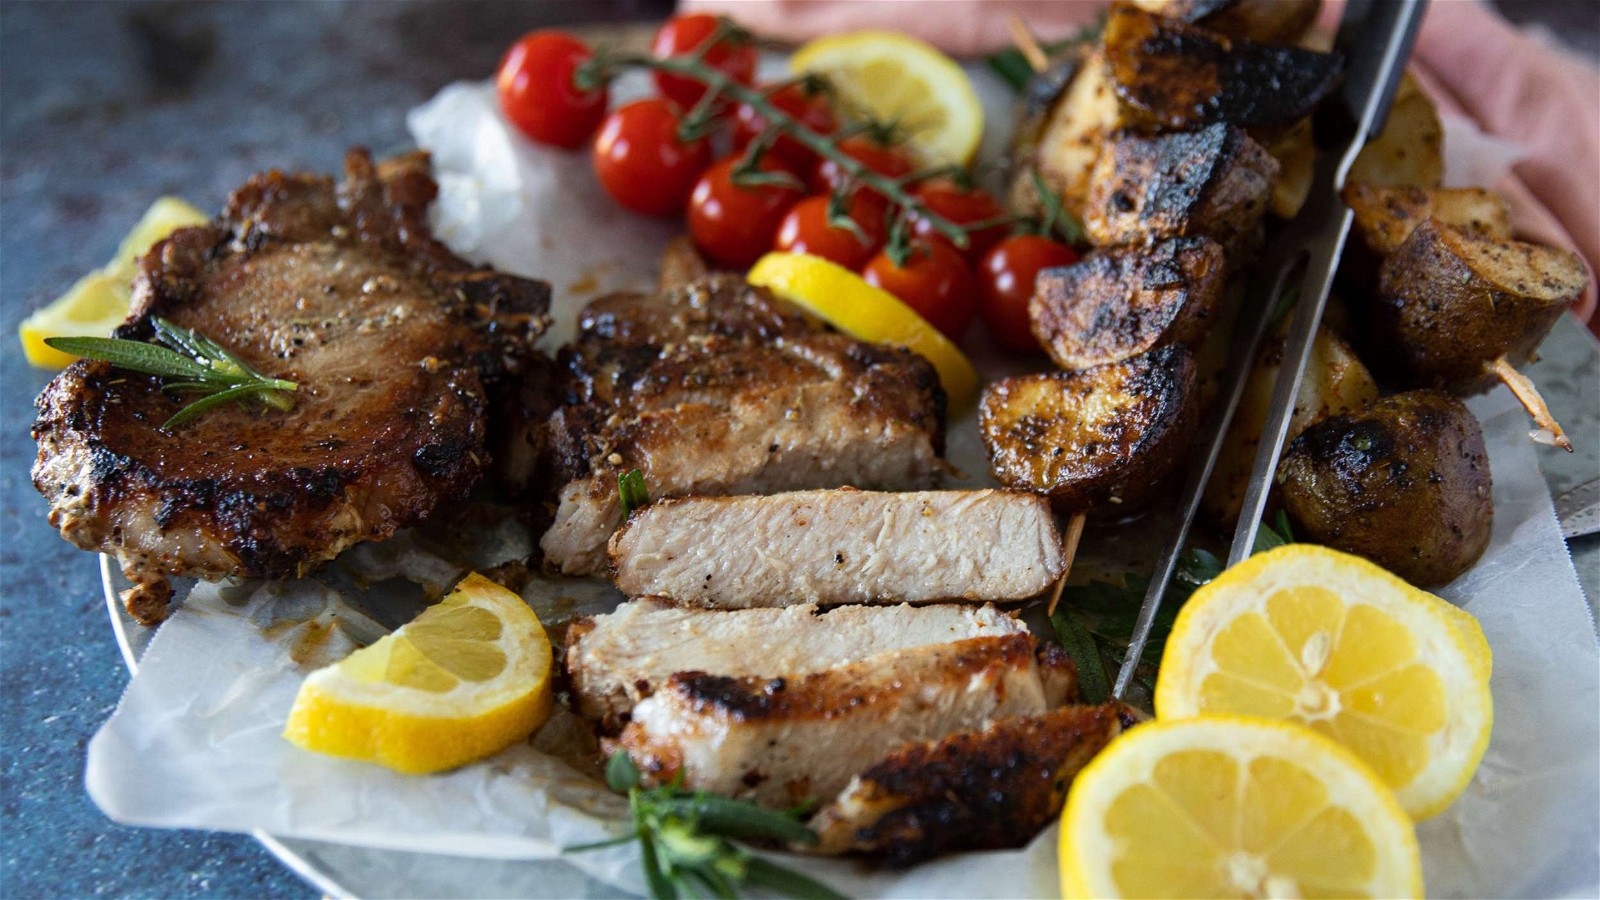 Image of Sealand French Cut Pork Chops on the Grill